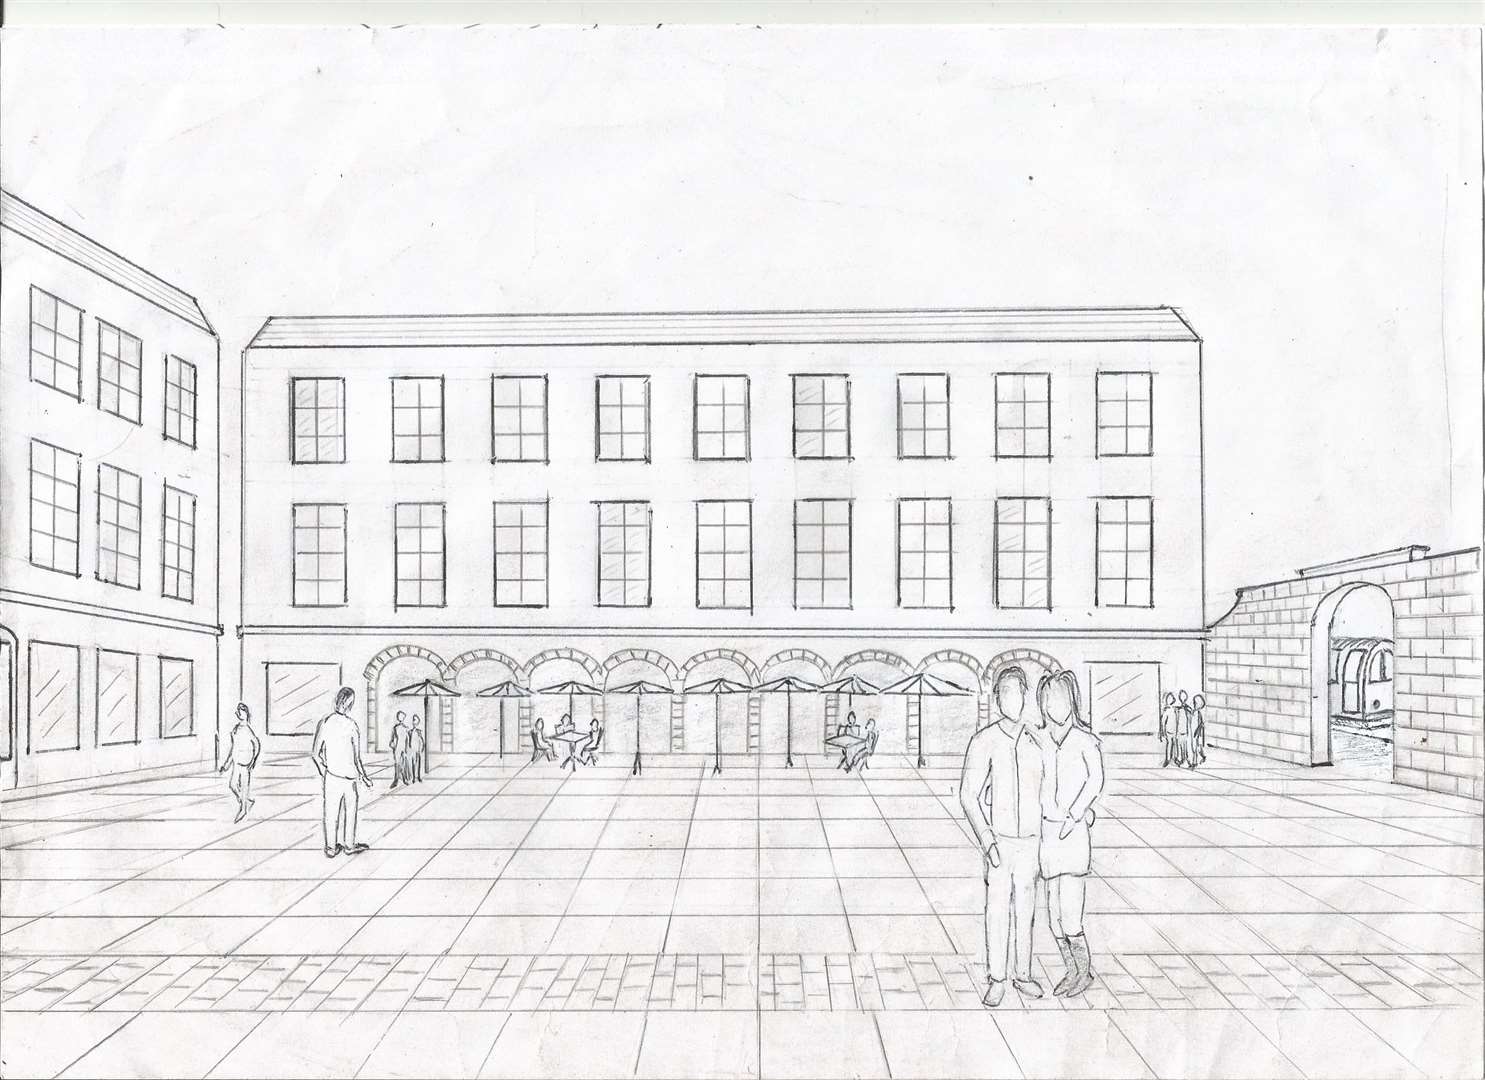 Mark Smyth's sketch for his proposed Inverness civic square.